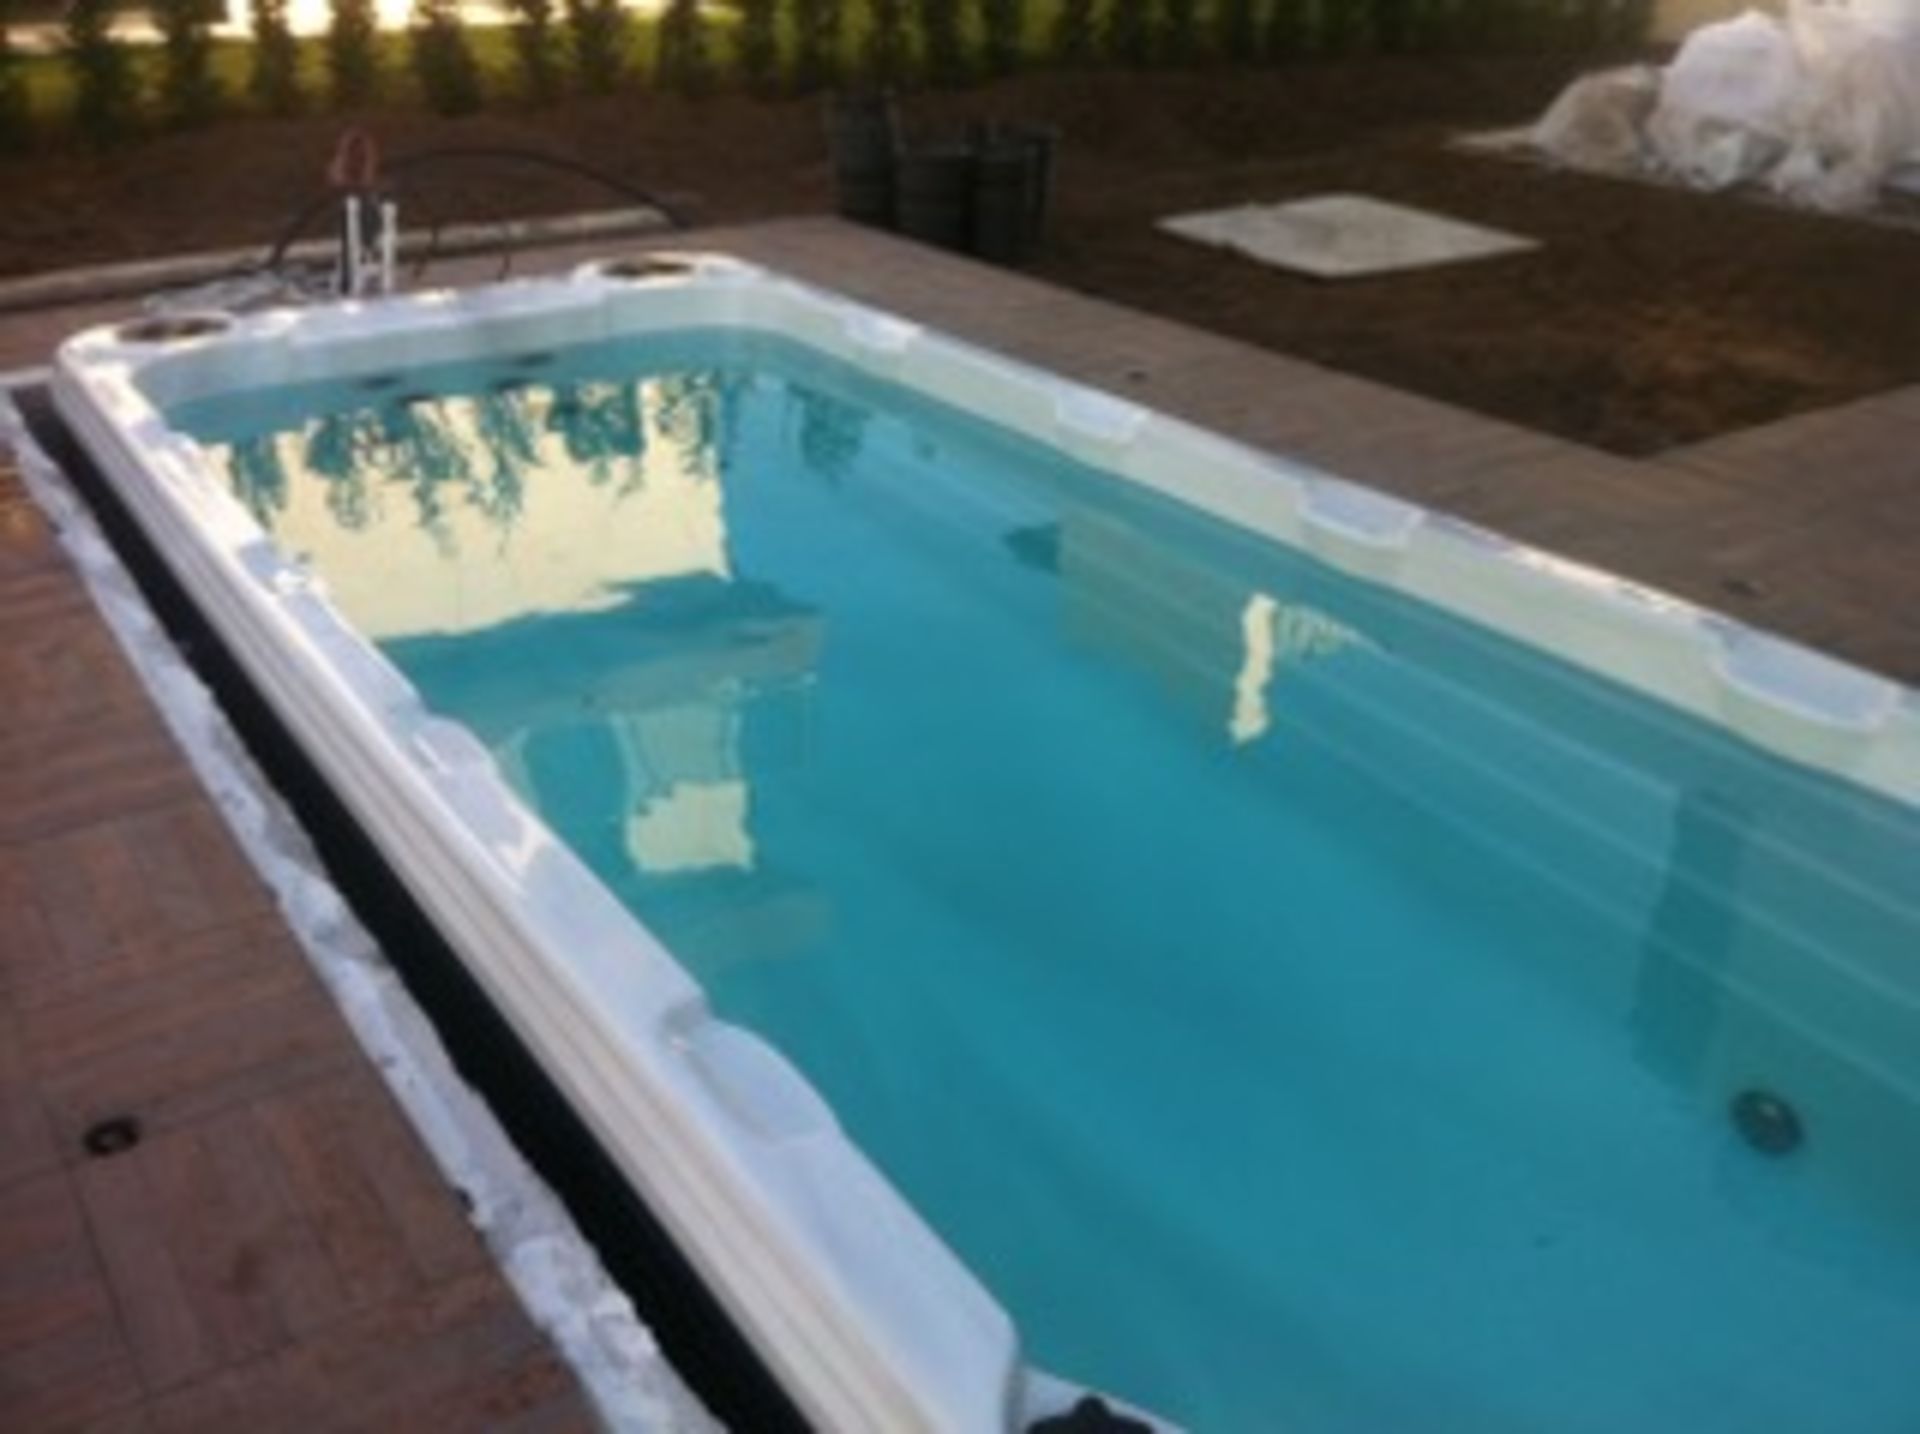 1 x Passion Spa Aquatic 6 - 7.8-Metre Swim Spa - Brand New With Warranty - RRP: £35,000 - CL774 - - Image 5 of 8